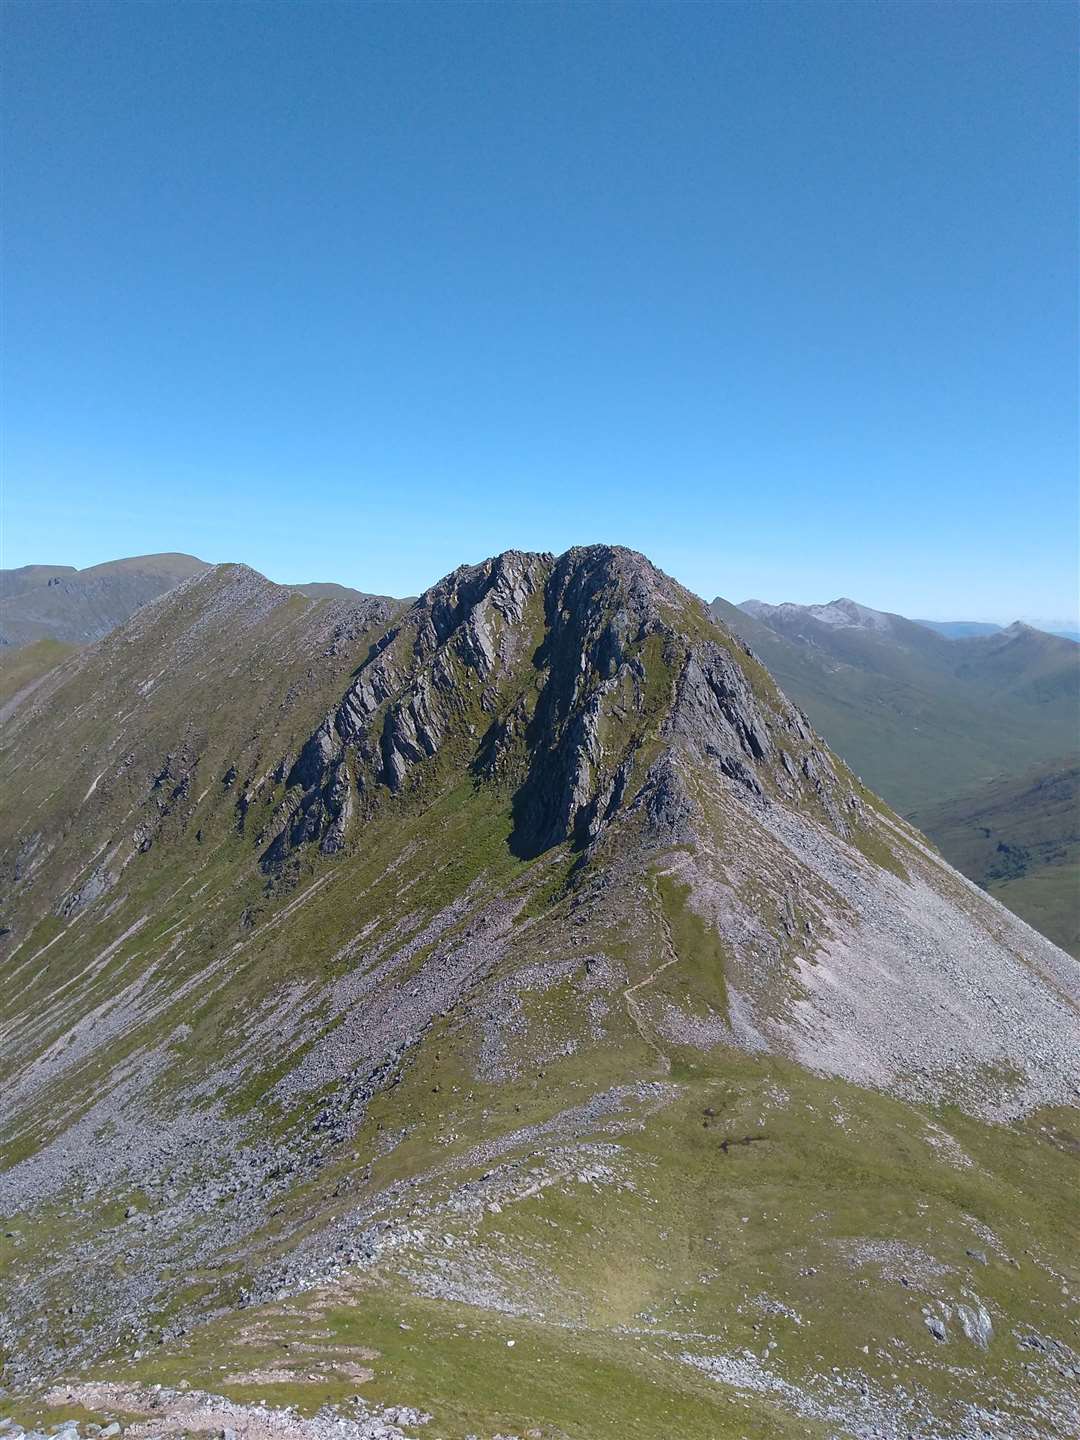 Looking back at An Gearanch from Stob Coire a' Chairn.